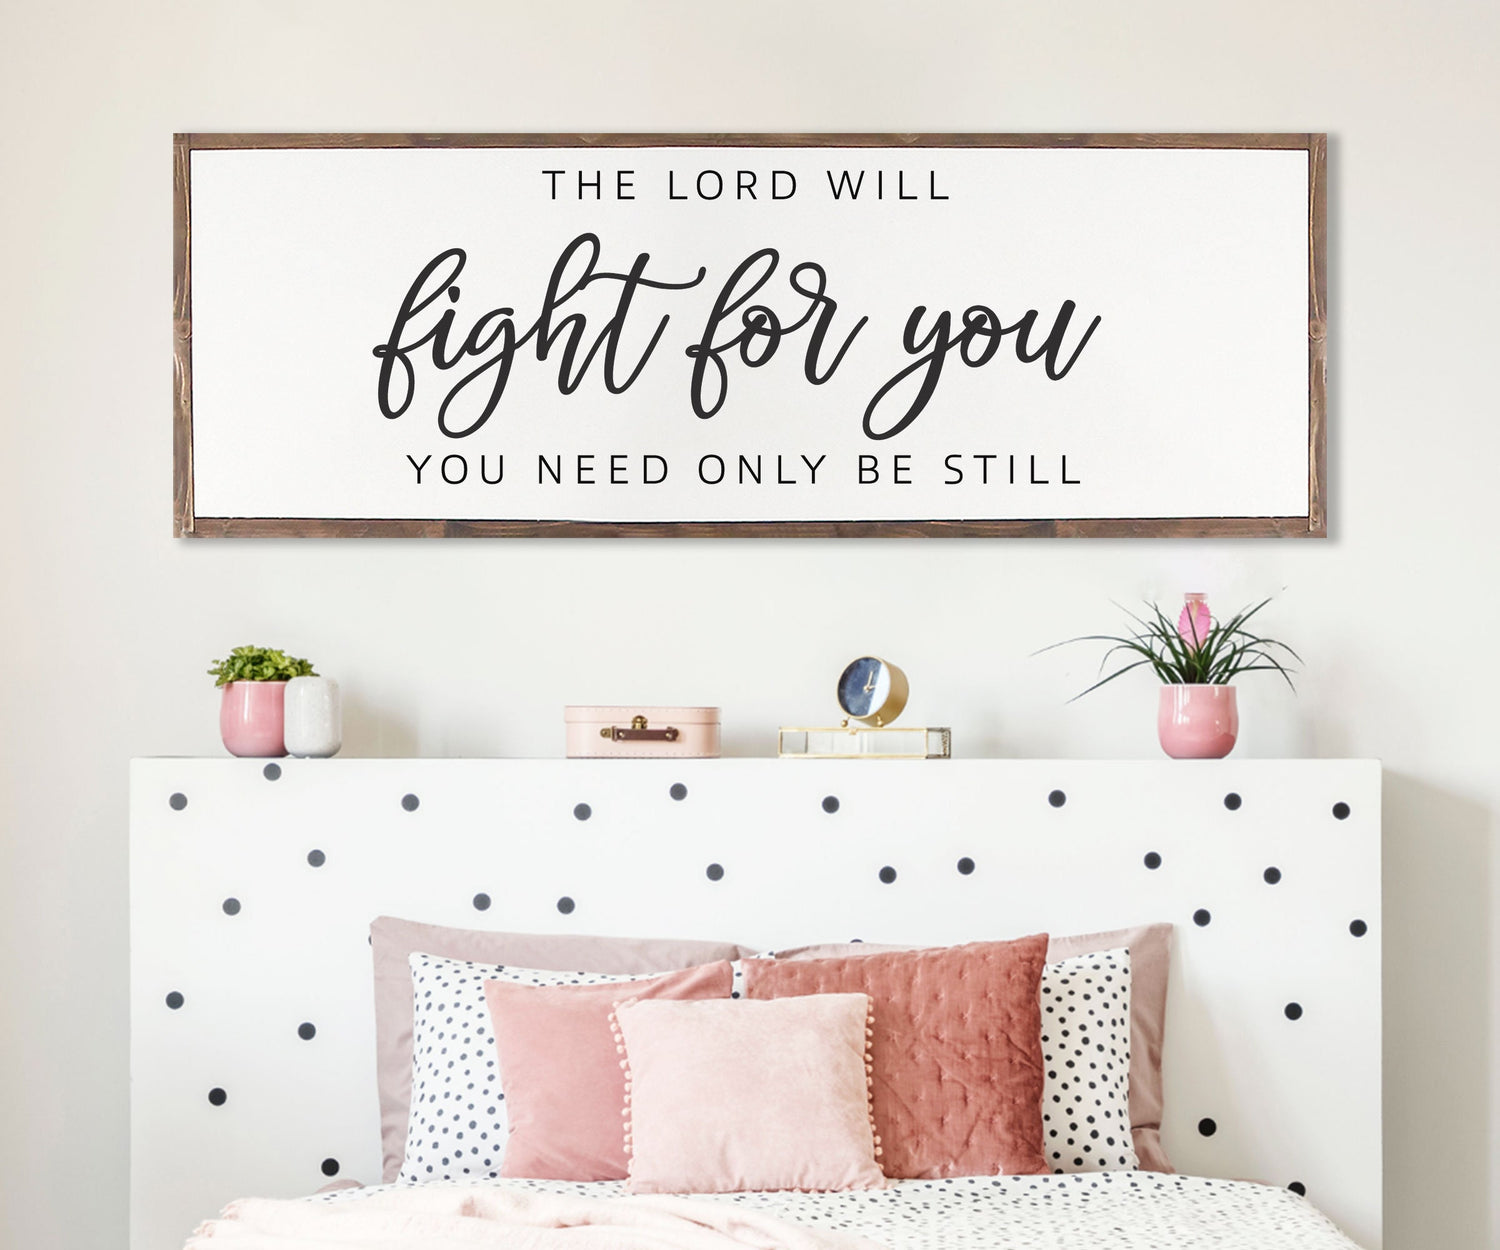 The Lord Will Fight For You You Need Only Be Still |  Farmhouse Wood Sign | CHRISTIAN WALL ART | Scripture Wall Art |  Exodus 14:14